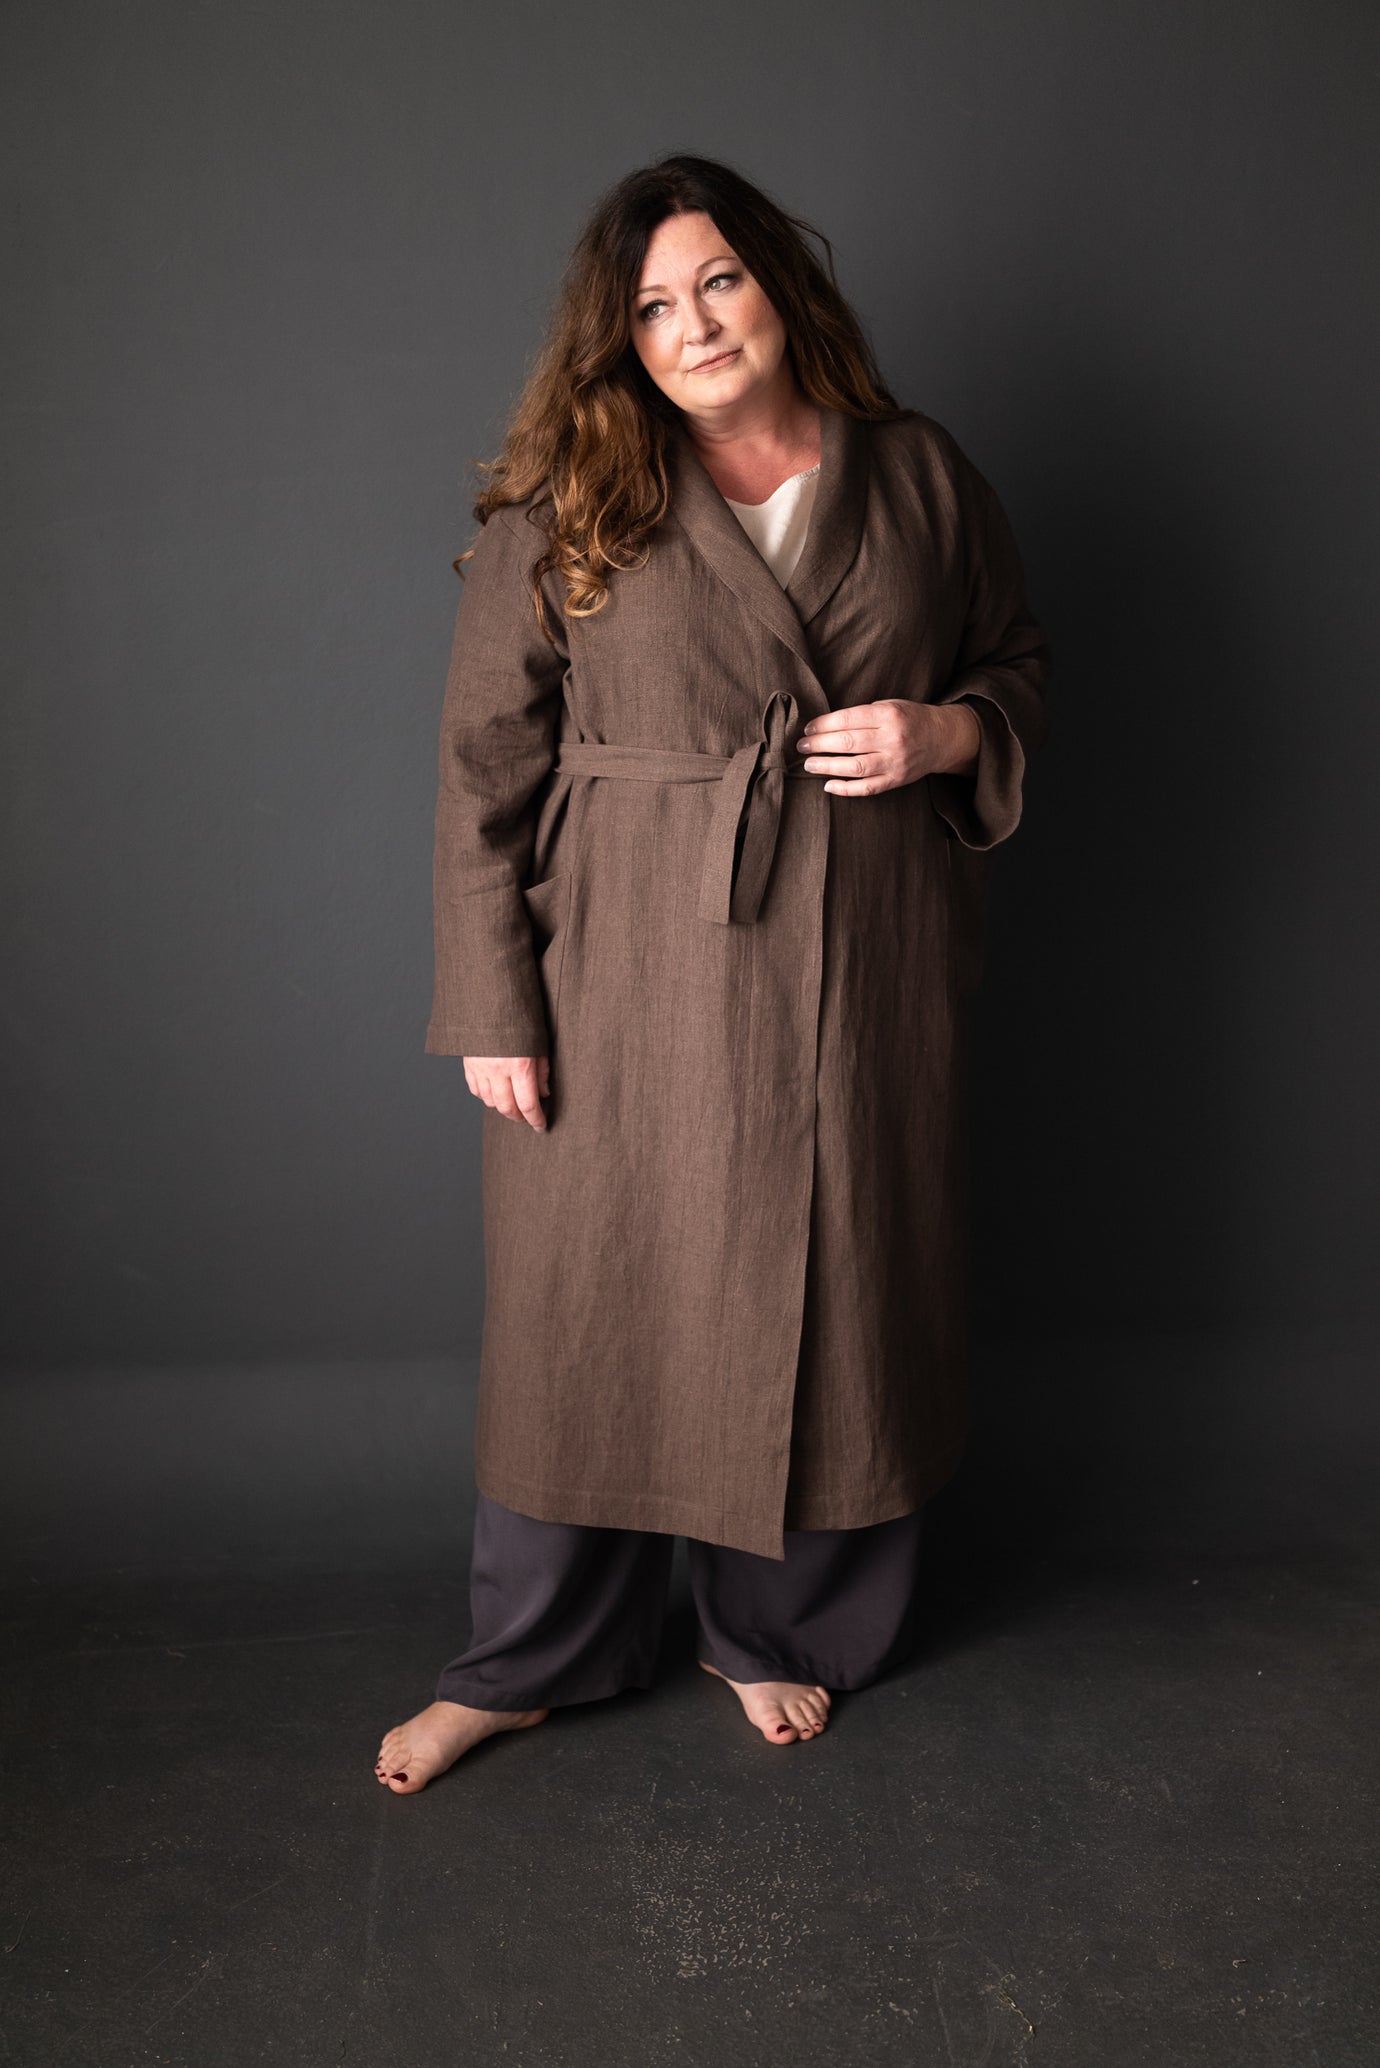 Woman wearing the Unisex Sunday Robe pattern from Merchant and Mills on The Fold Line. A robe pattern made in linen, cottons, lawn, linen waffle or tencel/linen fabrics, featuring an inner tie, patch pockets, shawl collar, self-fabric tie belt and mid-cal